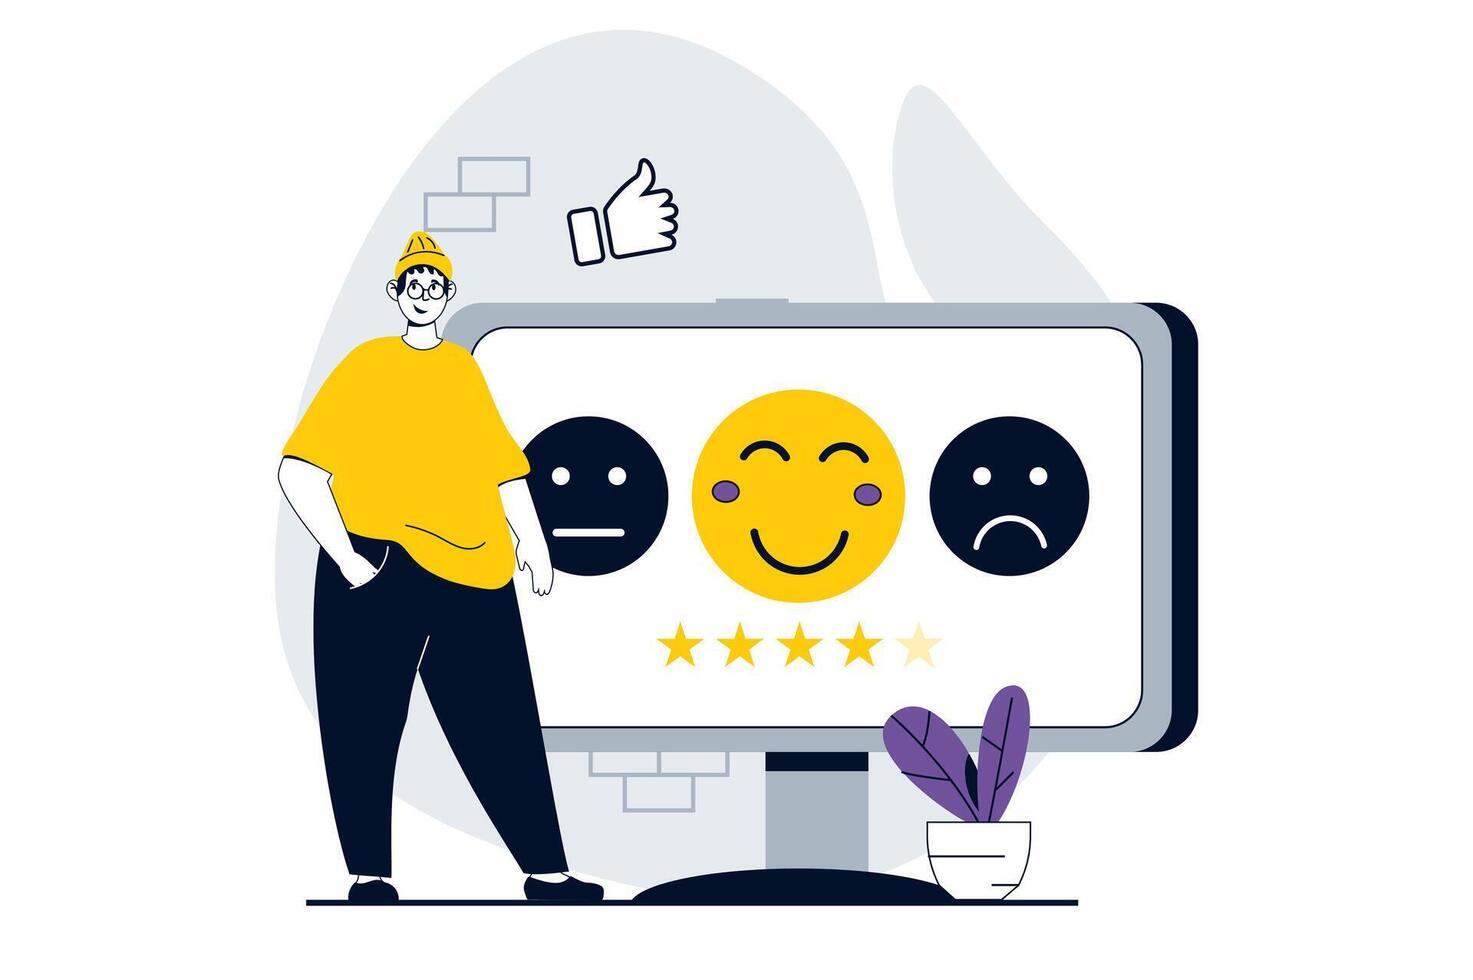 Feedback page concept with people scene in flat design for web. Man choosing smile with good emotion for client experience evaluation. Vector illustration for social media banner, marketing material.